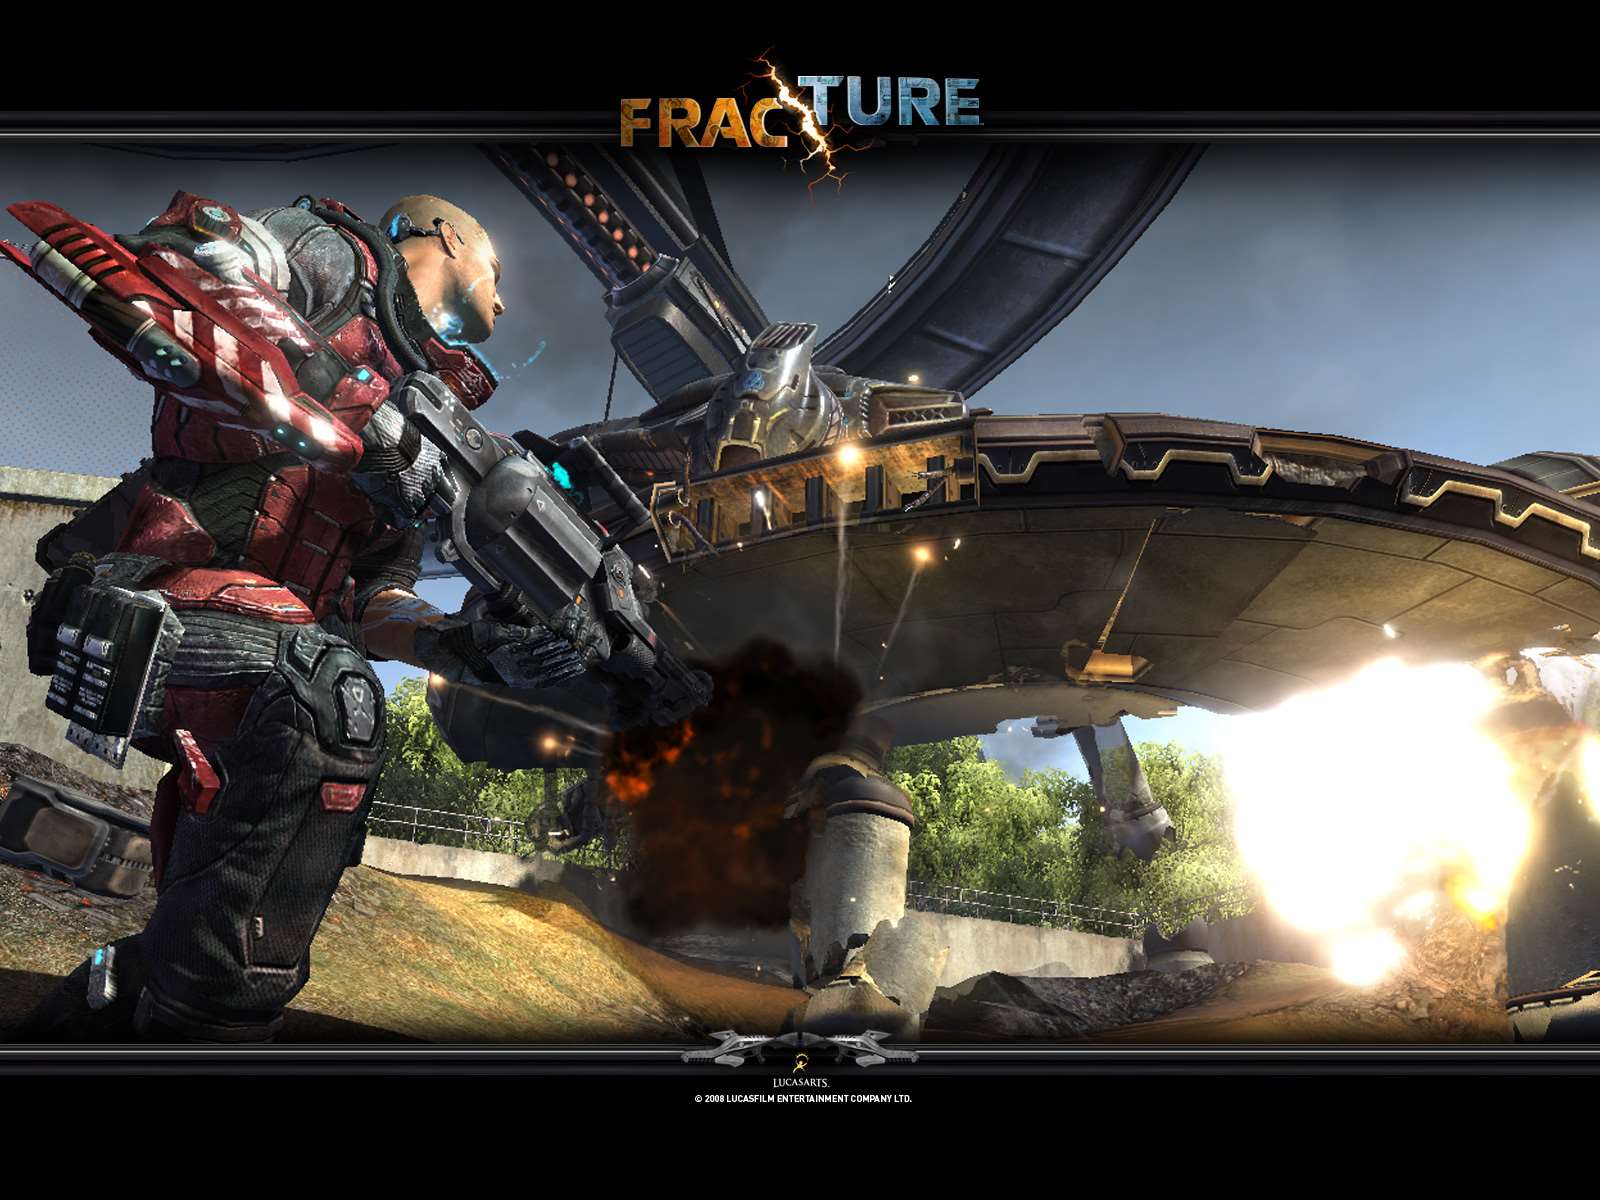 Official Fracture Wallpaper 11   Xbox 360 Wallpaper   Xbox 360